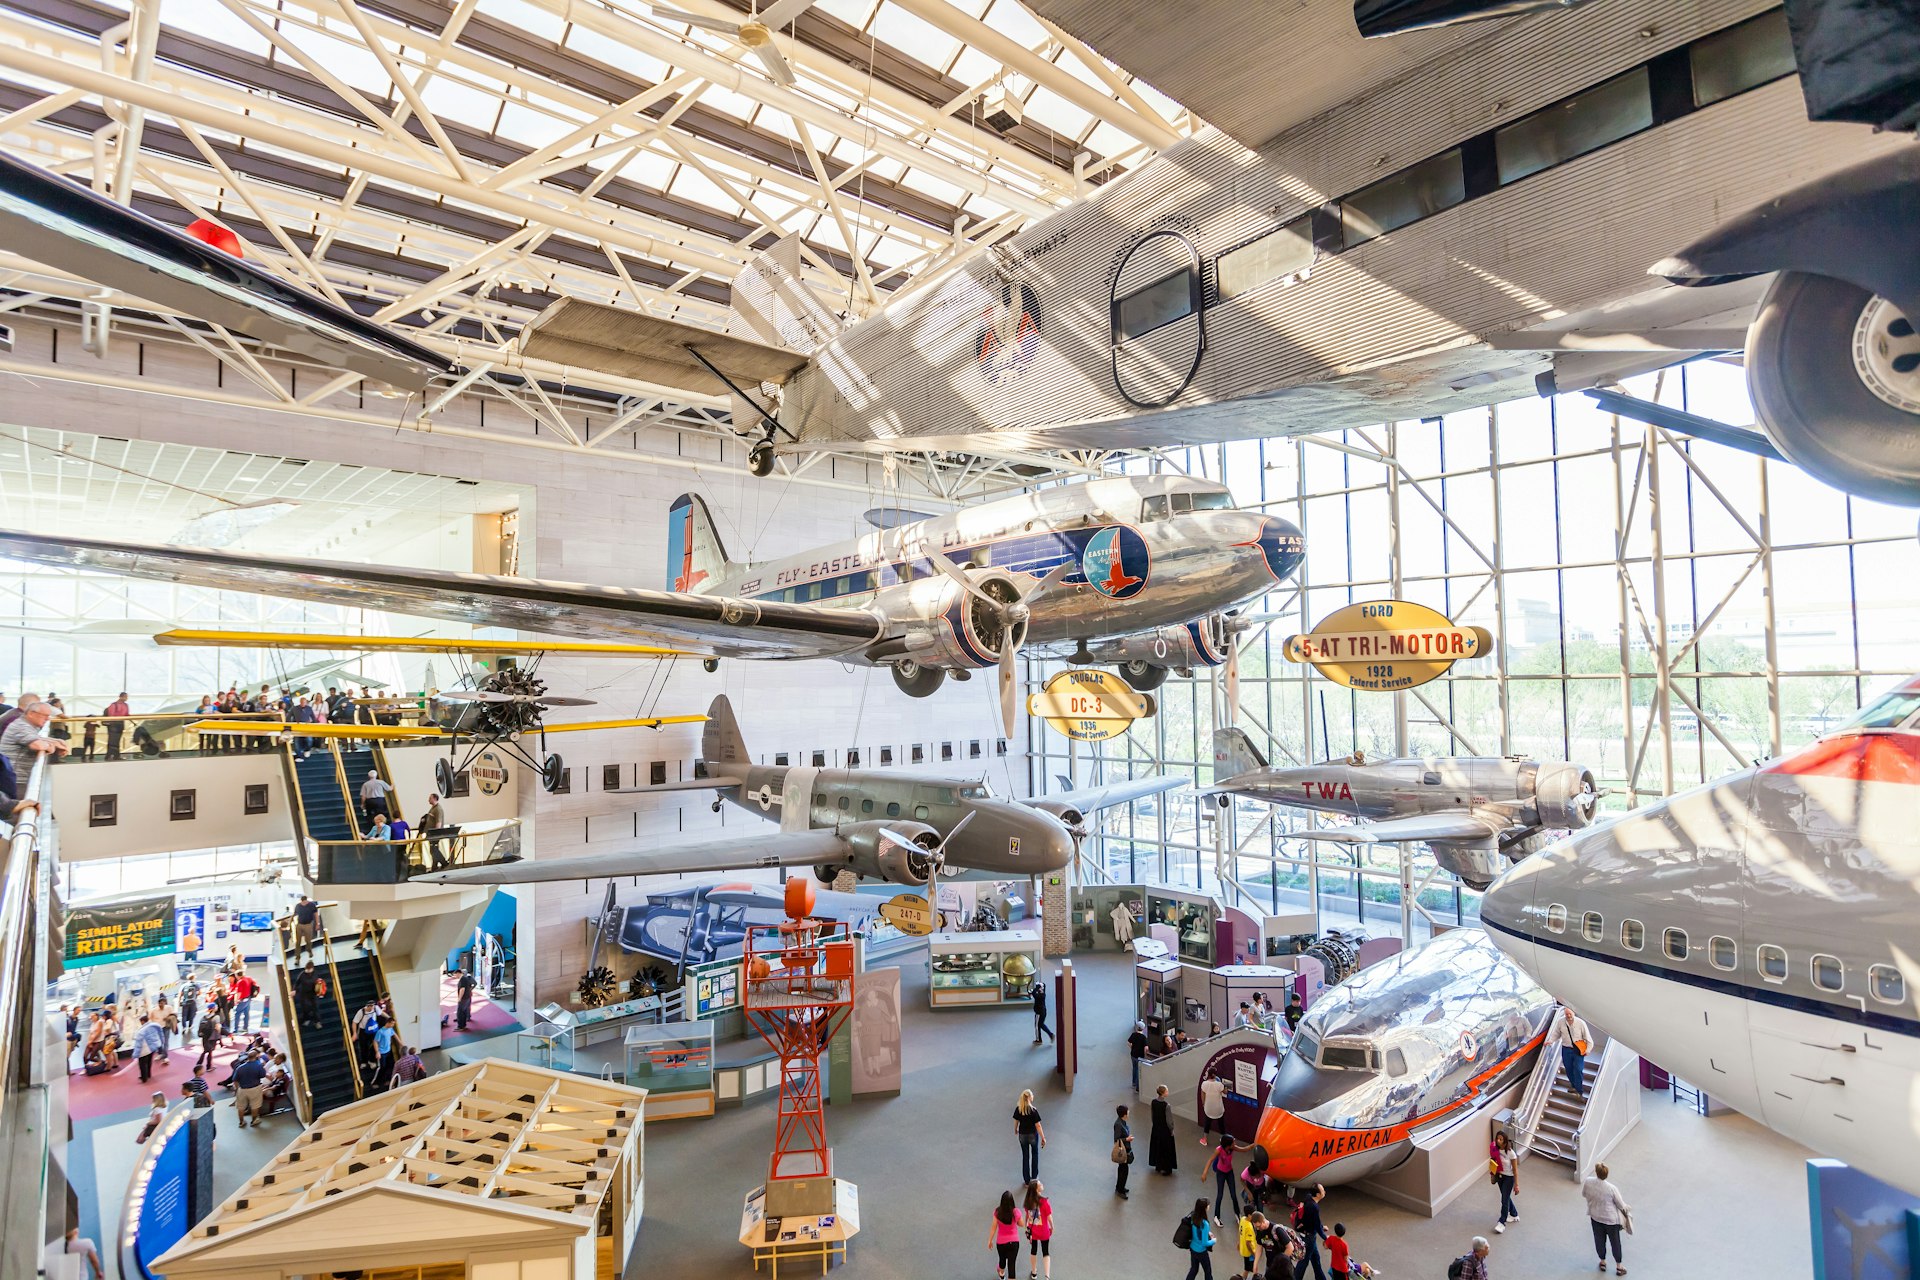 Airplanes on display in a museum building